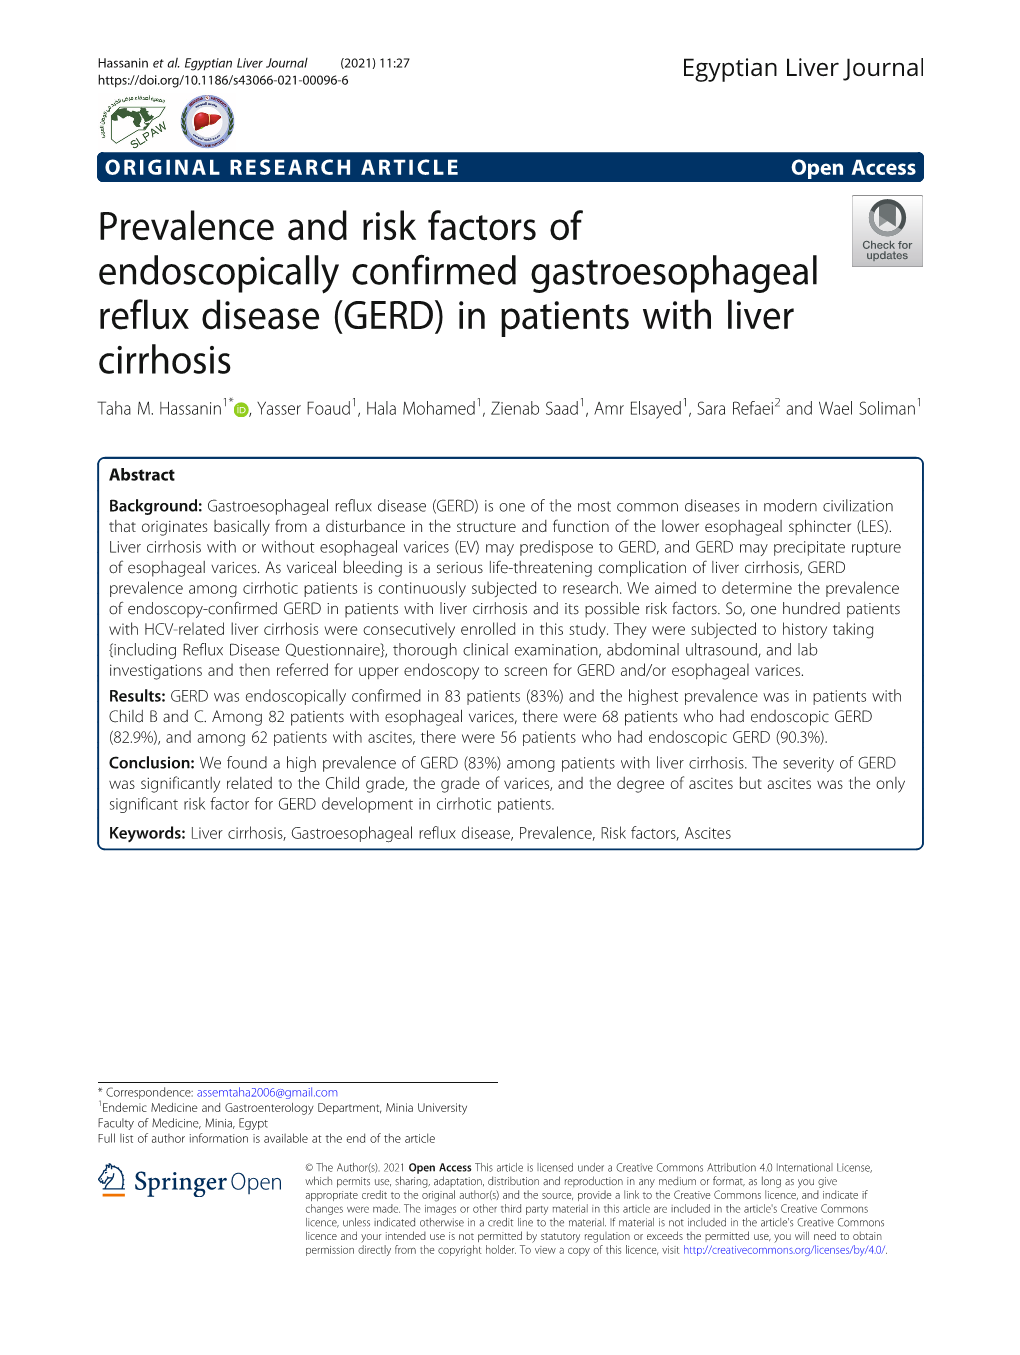 (GERD) in Patients with Liver Cirrhosis Taha M